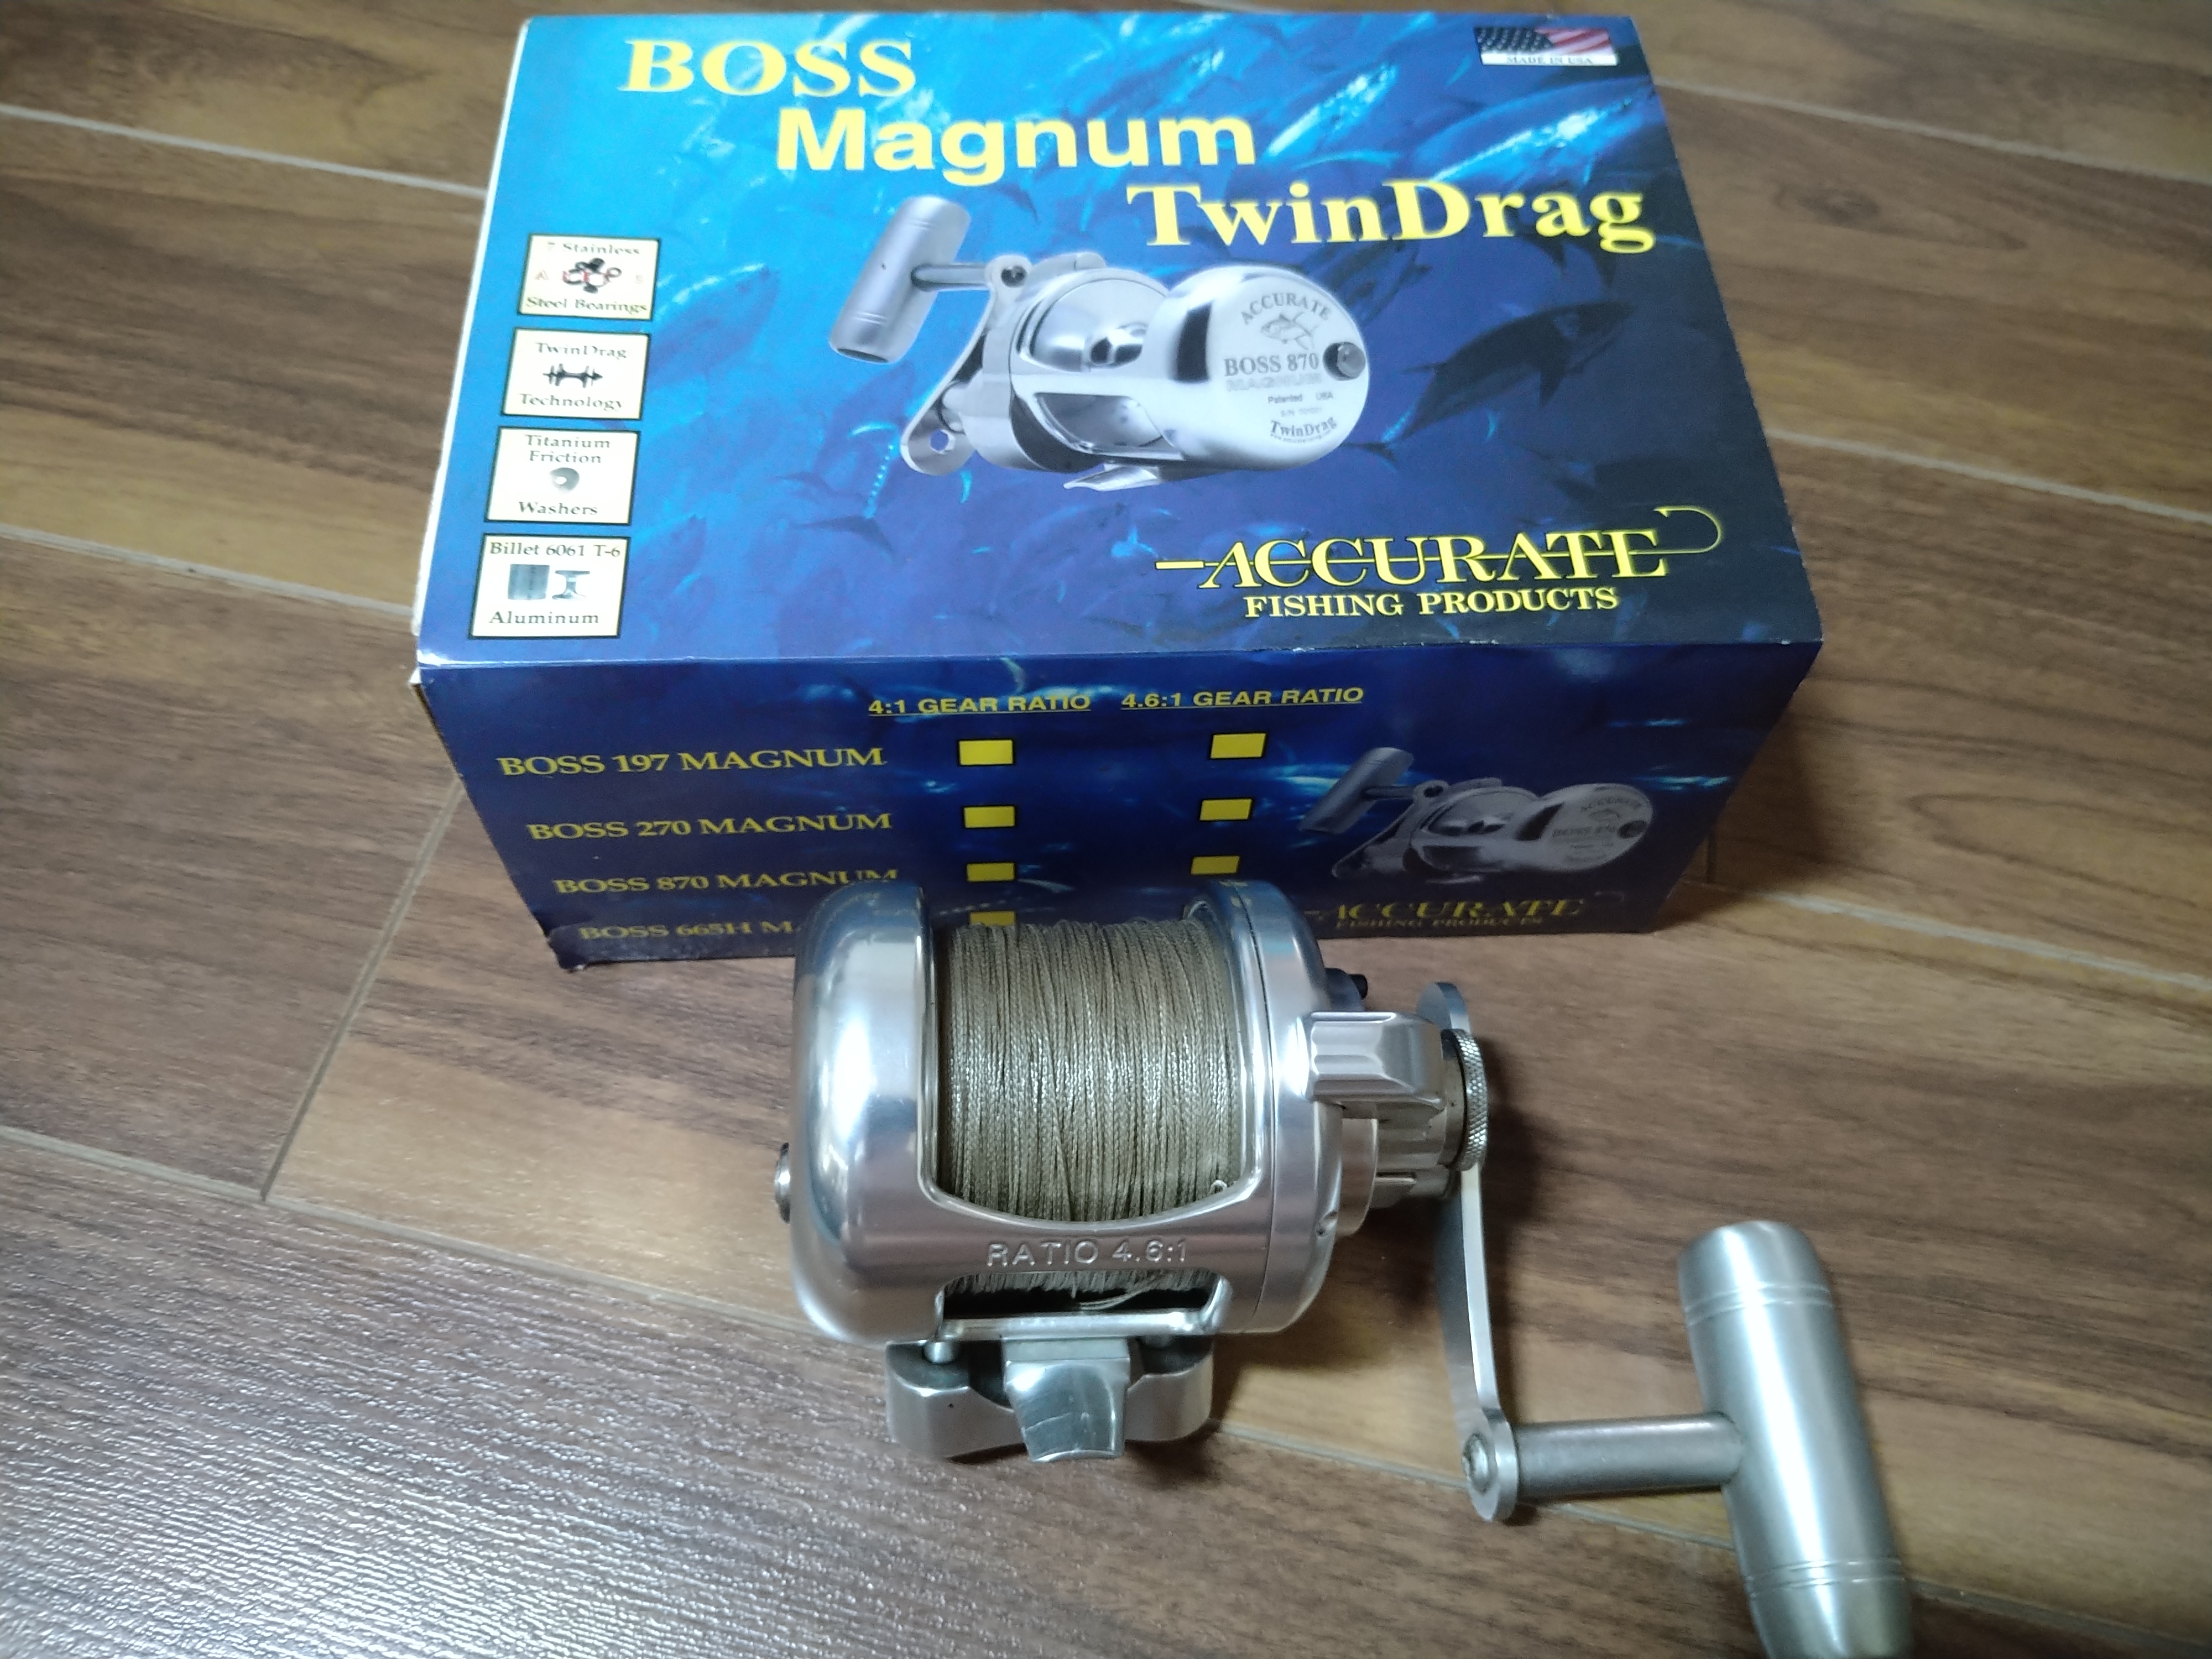 Fishing Reel ACCURATE E-Series Boss Magnum B870 - Sports & Outdoors for sale  in Gombak, Kuala Lumpur